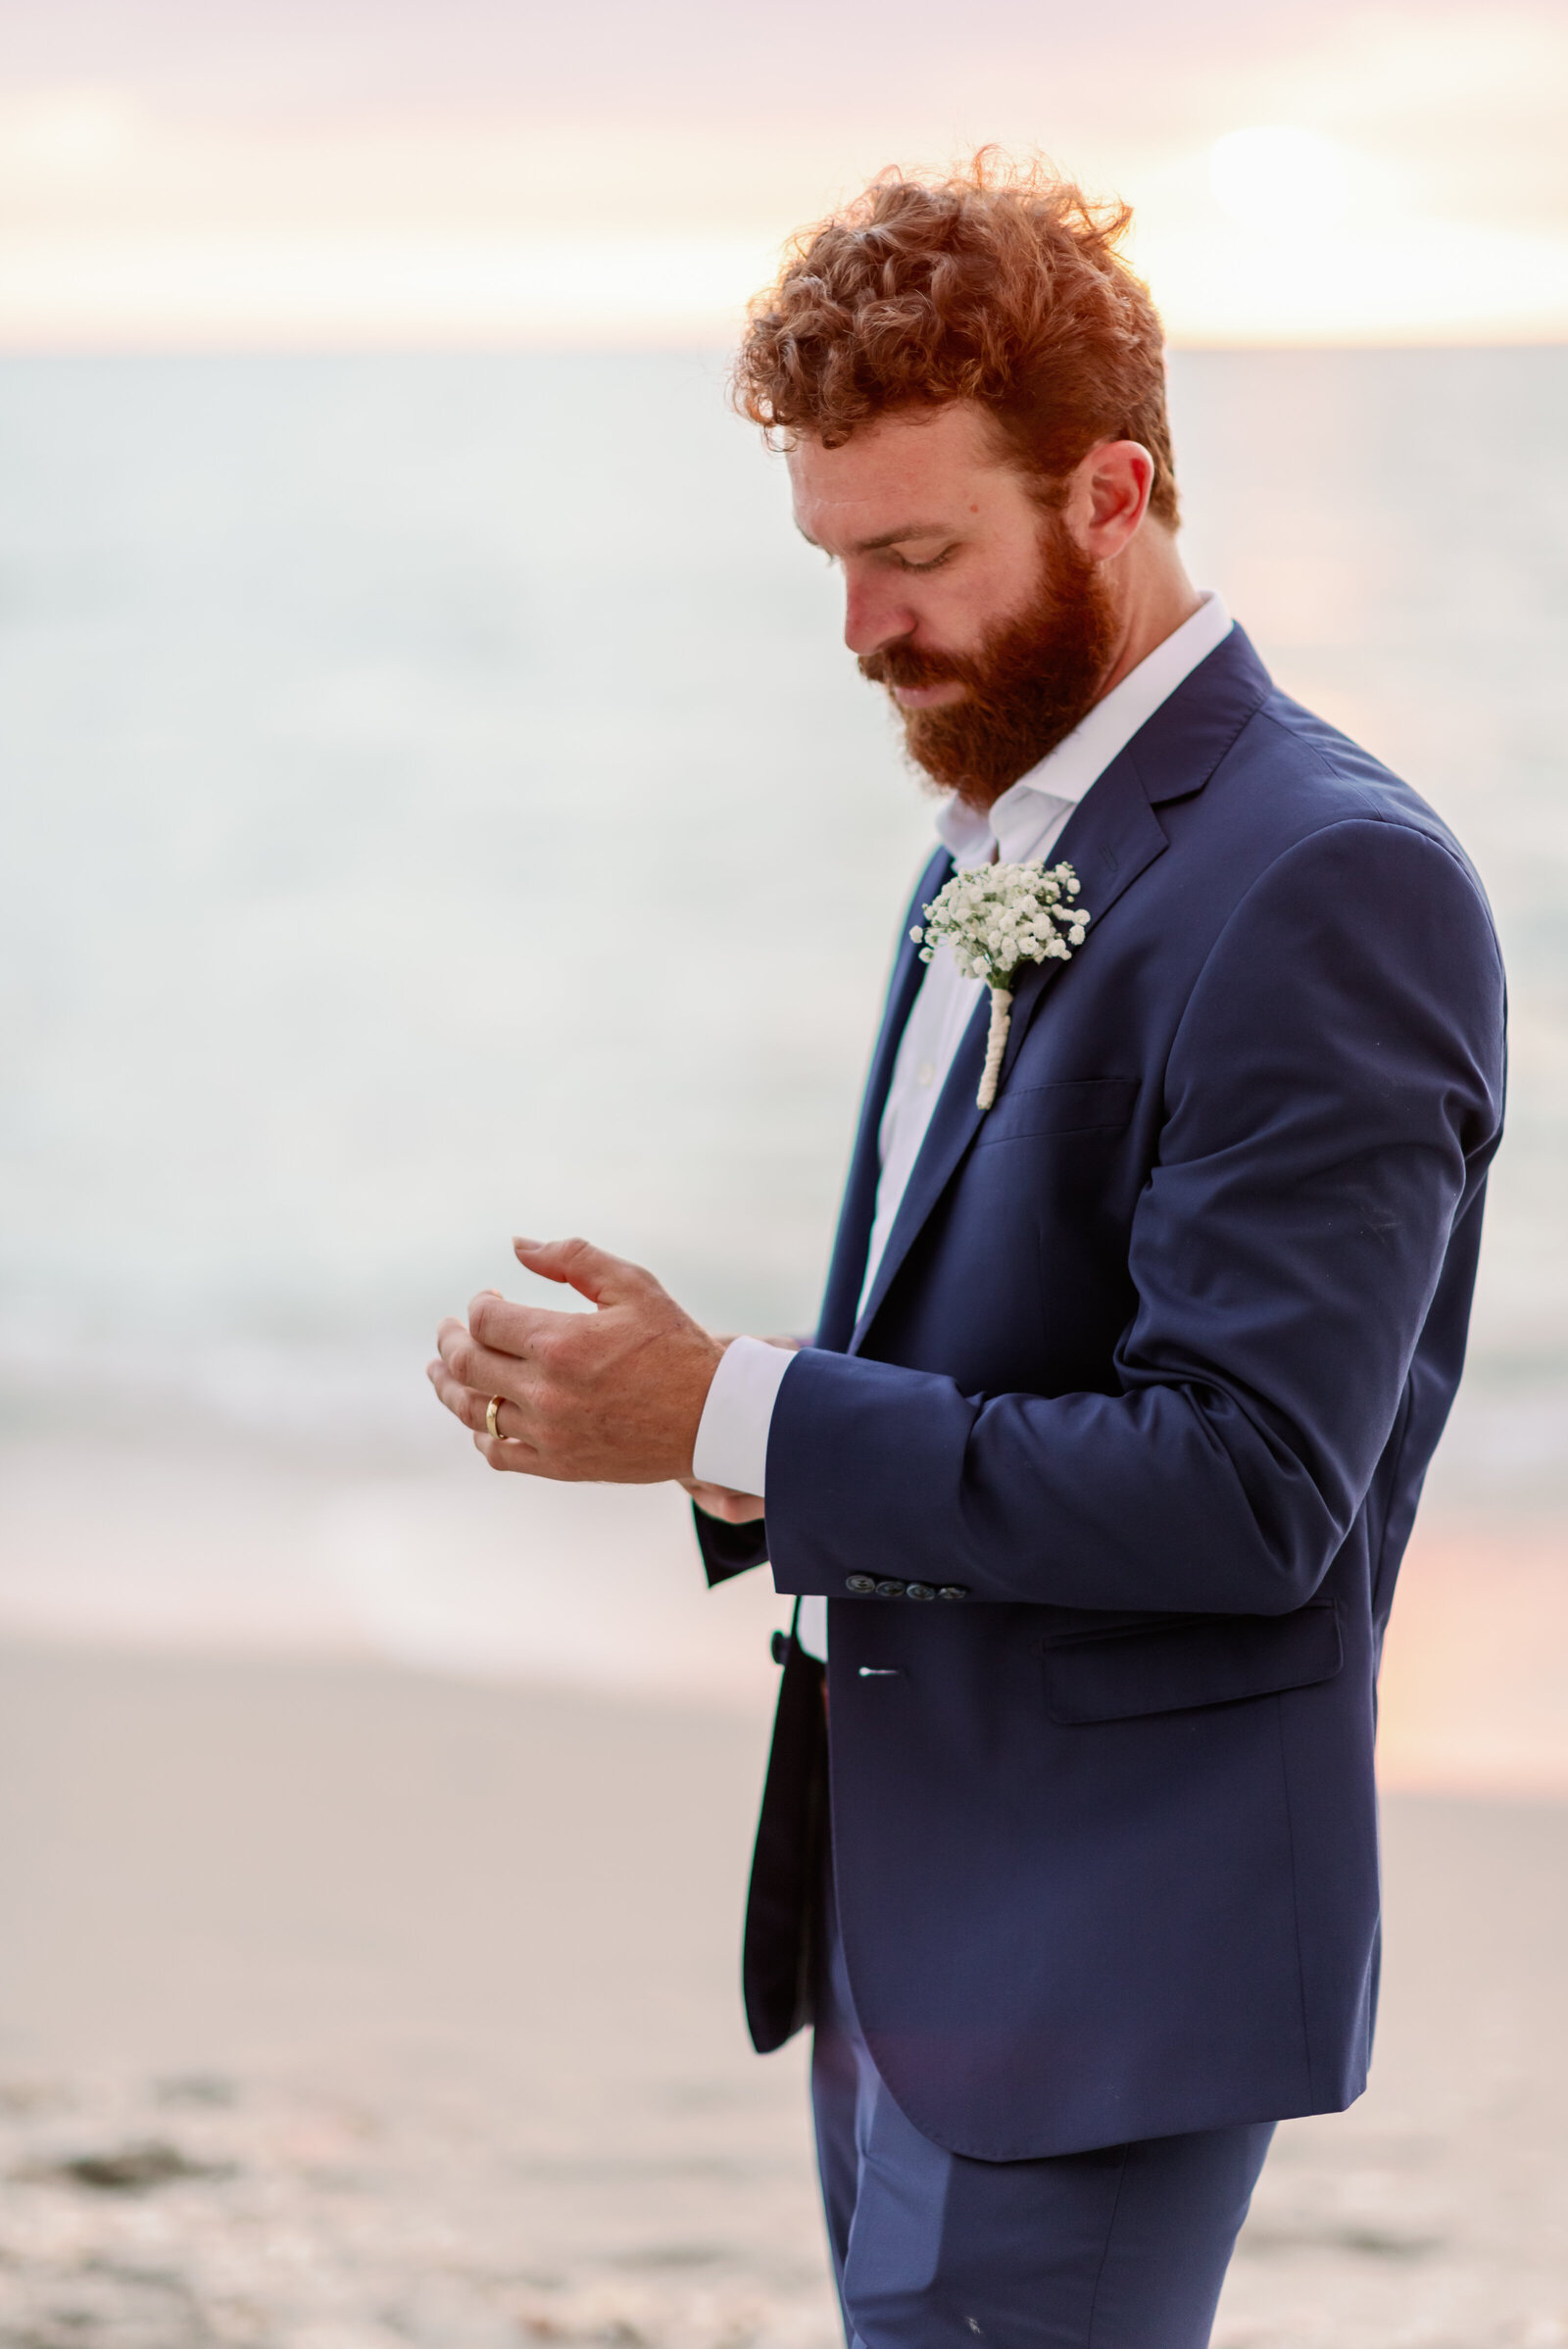 groom slone standing on the beach looking down at his wrist while he adjusts his watch